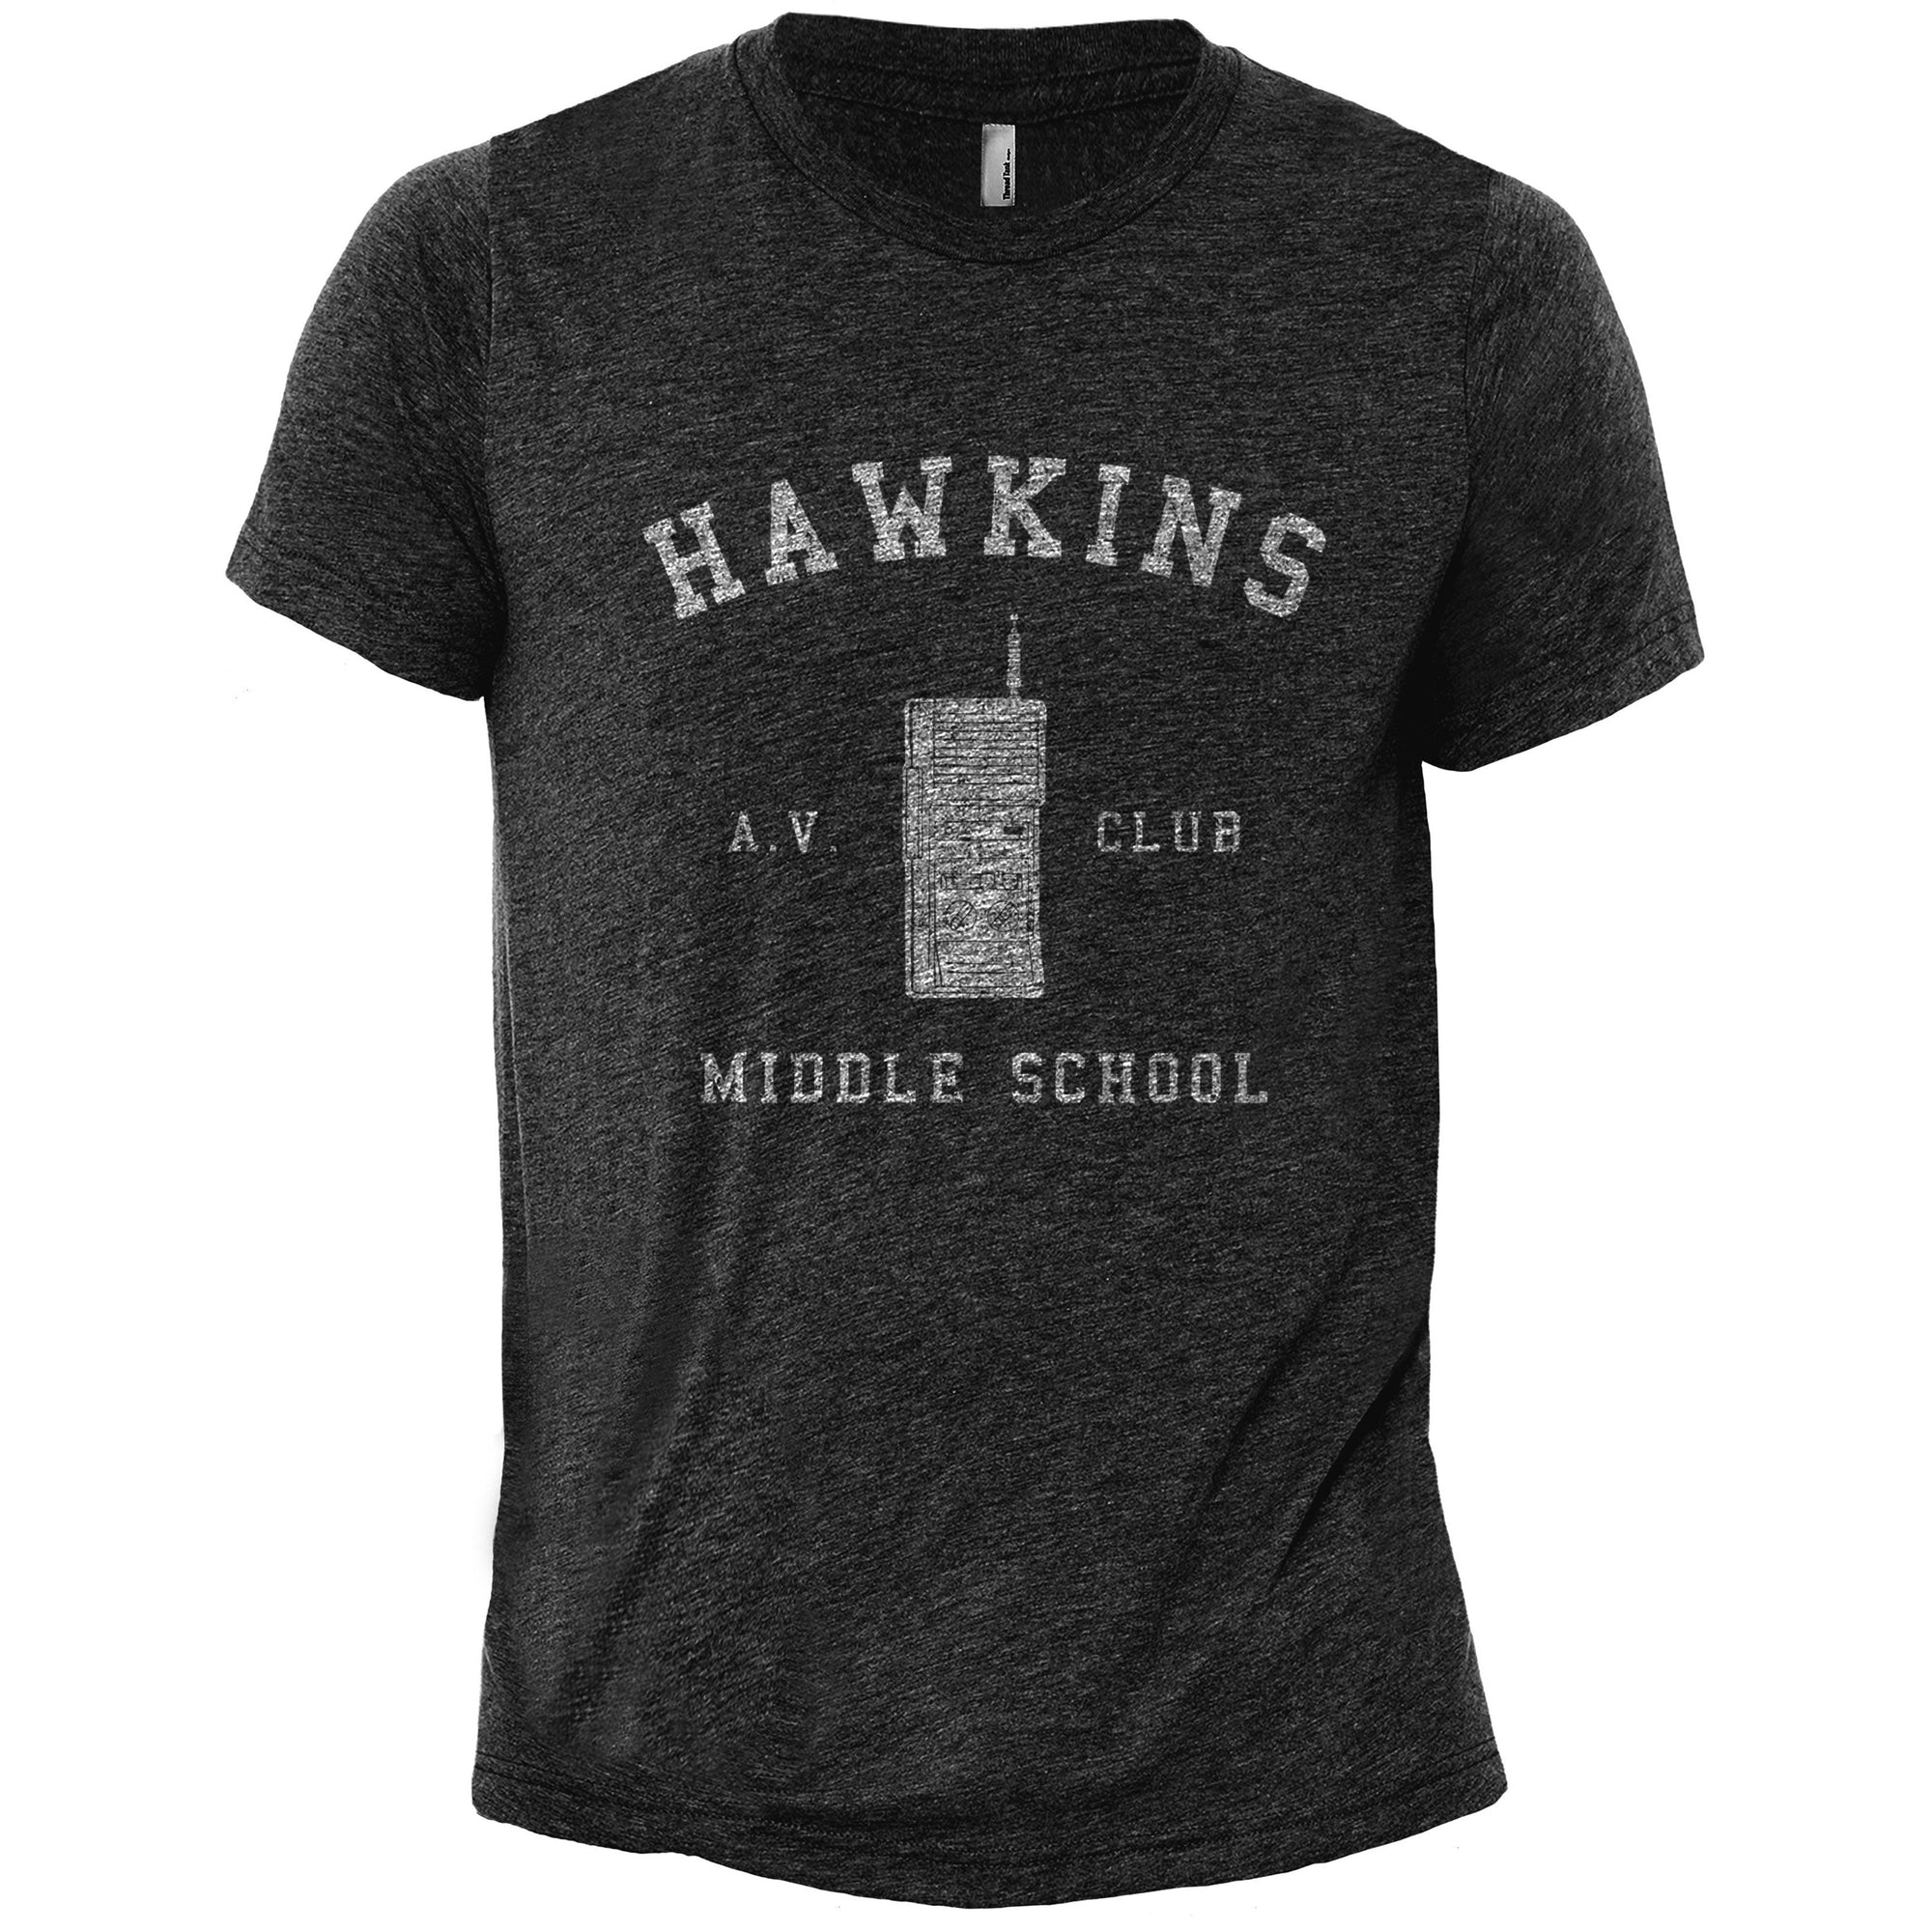 Hawkins Middle School Printed Graphic Men's Crew T-Shirt Charcoal Main Image